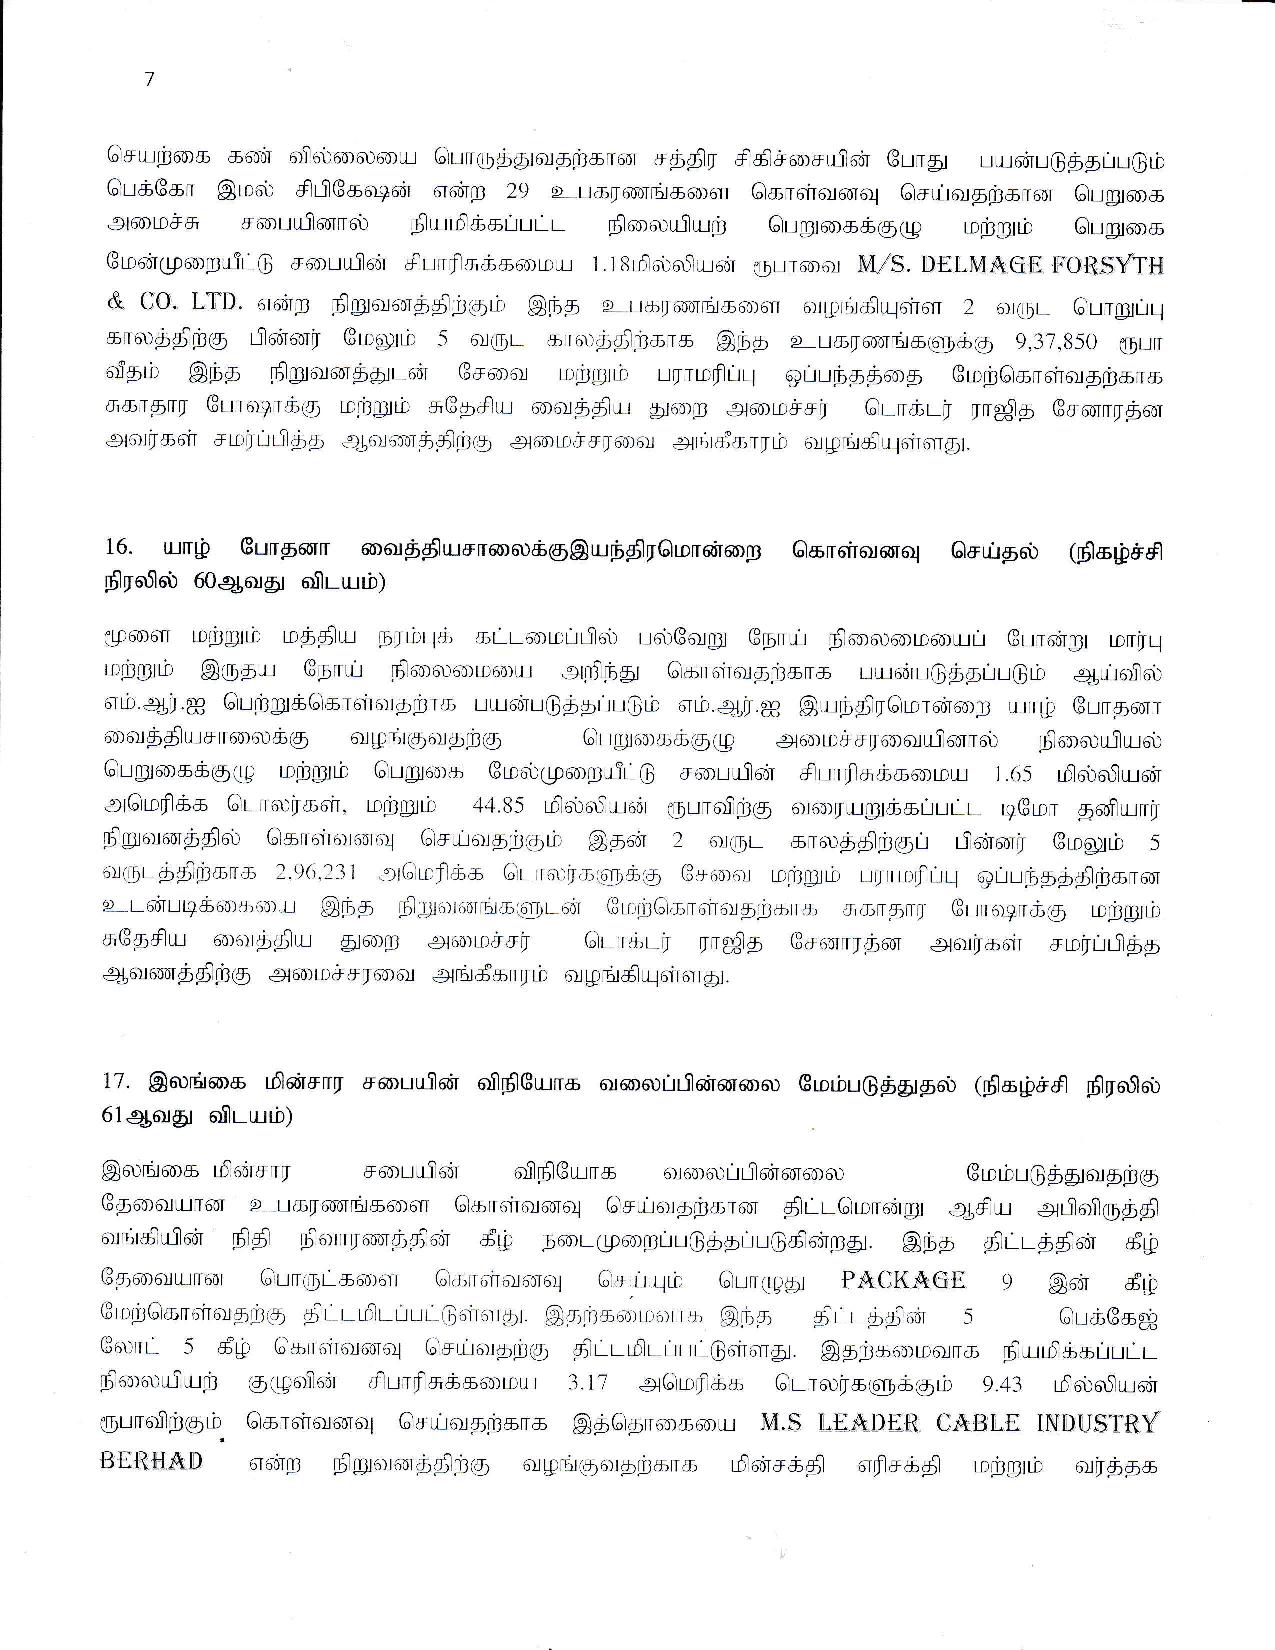 Cabinet Decision on 21.05.2019 Tamil page 008